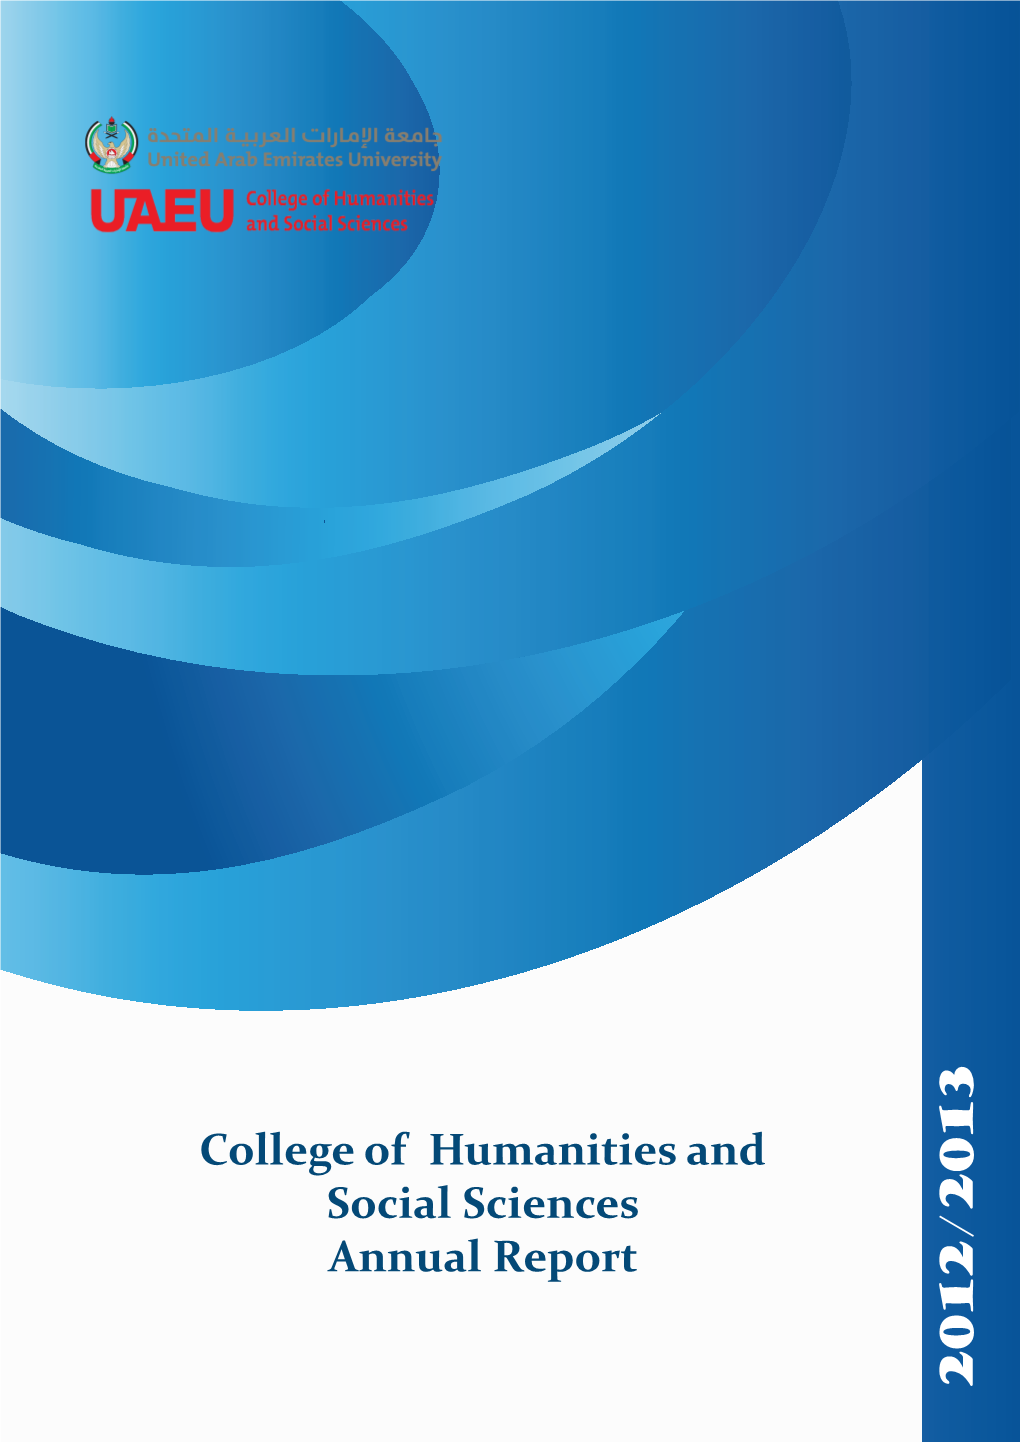 College of Humanities and Social Sciences Annual Report 2012/2013